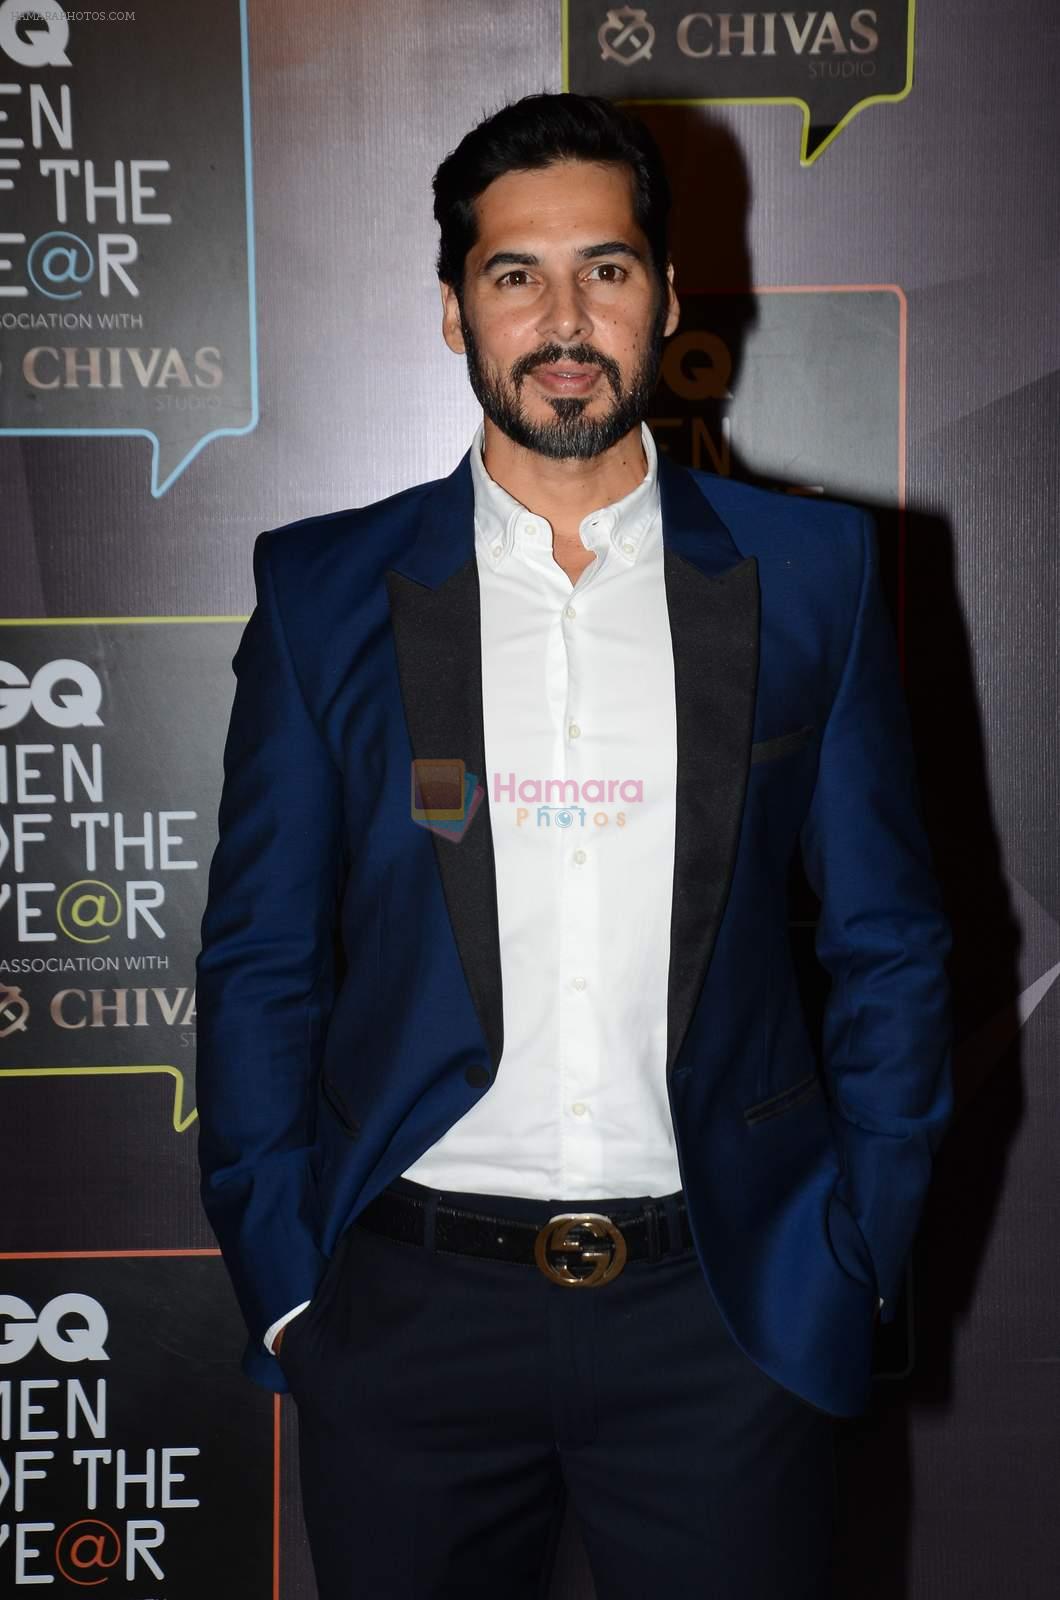 Dino Morea at GQ men of the year 2015 on 26th Sept 2015